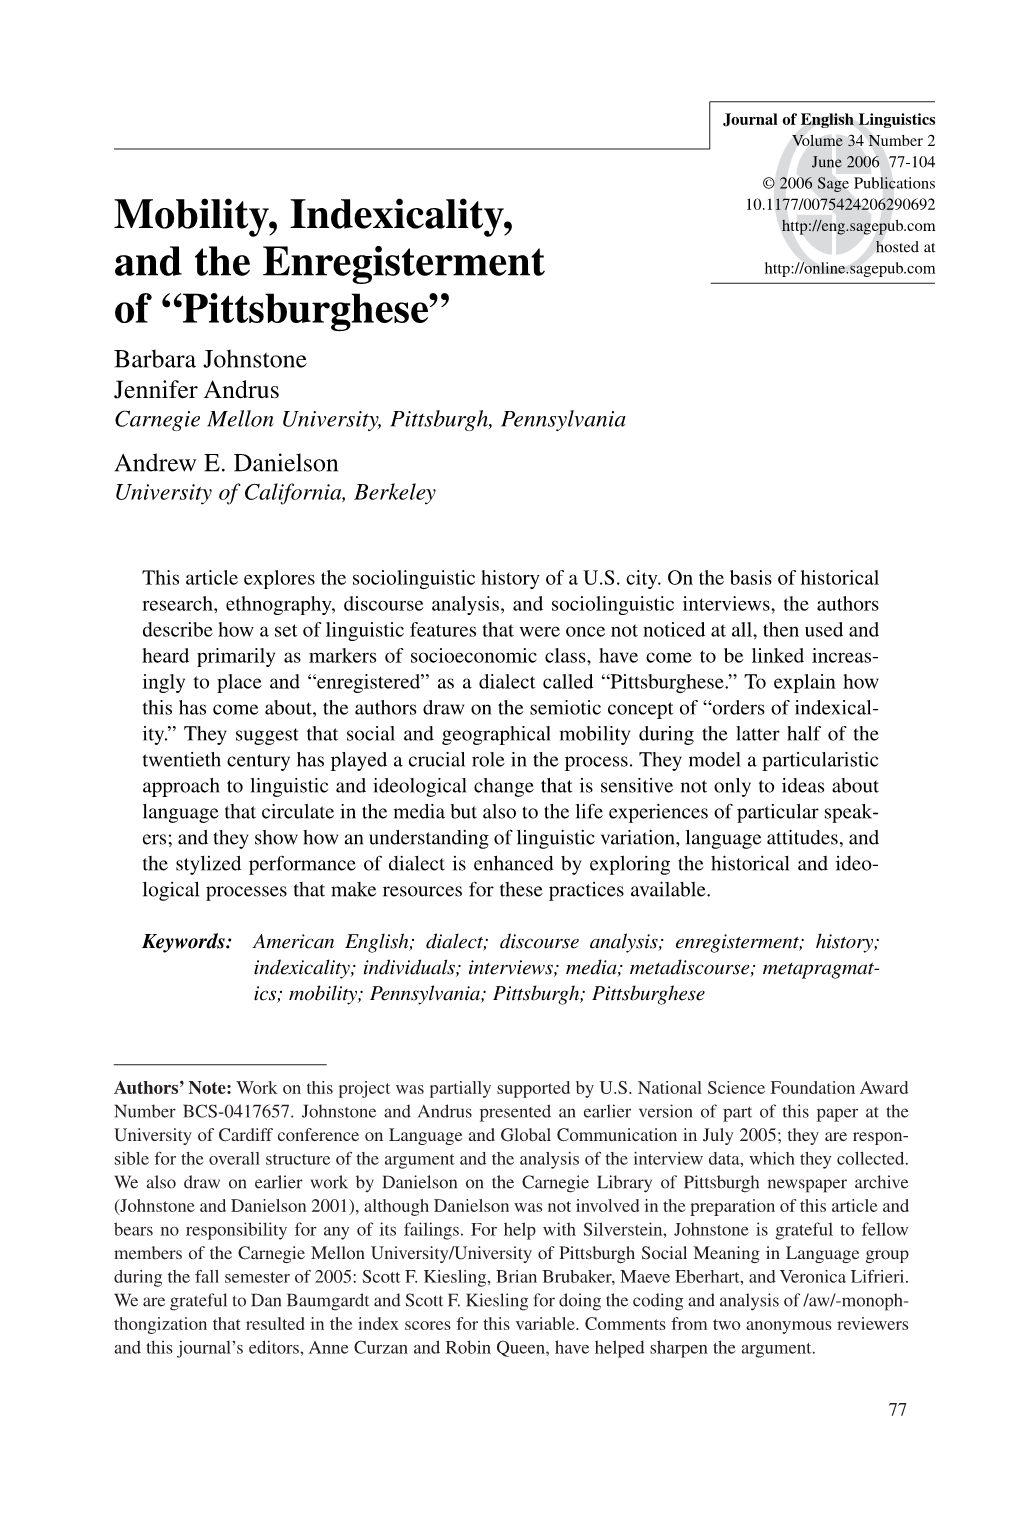 Mobility, Indexicality, and the Enregisterment of “Pittsburghese”